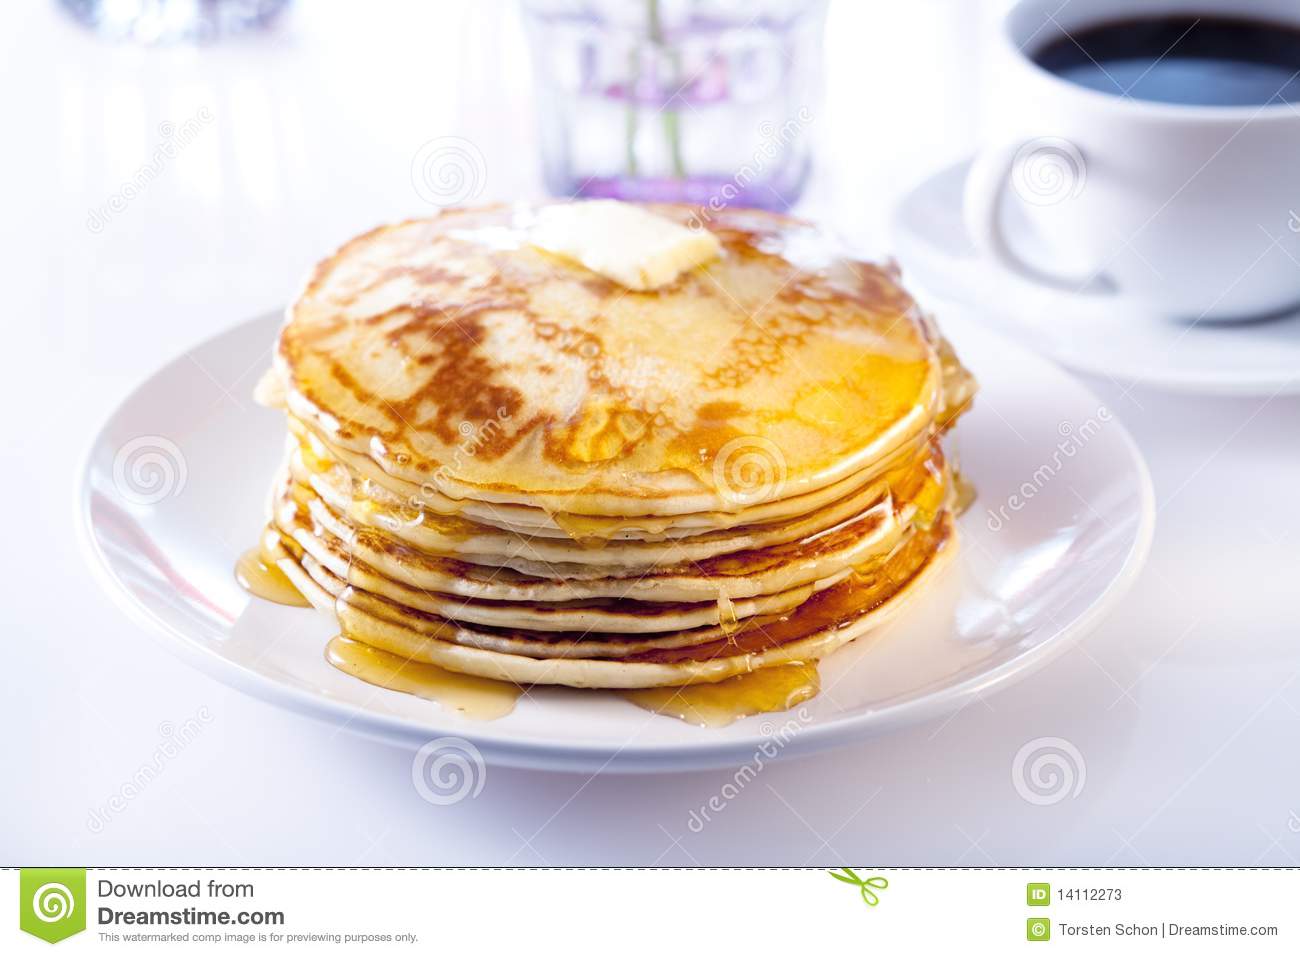 Pancakes and Coffee